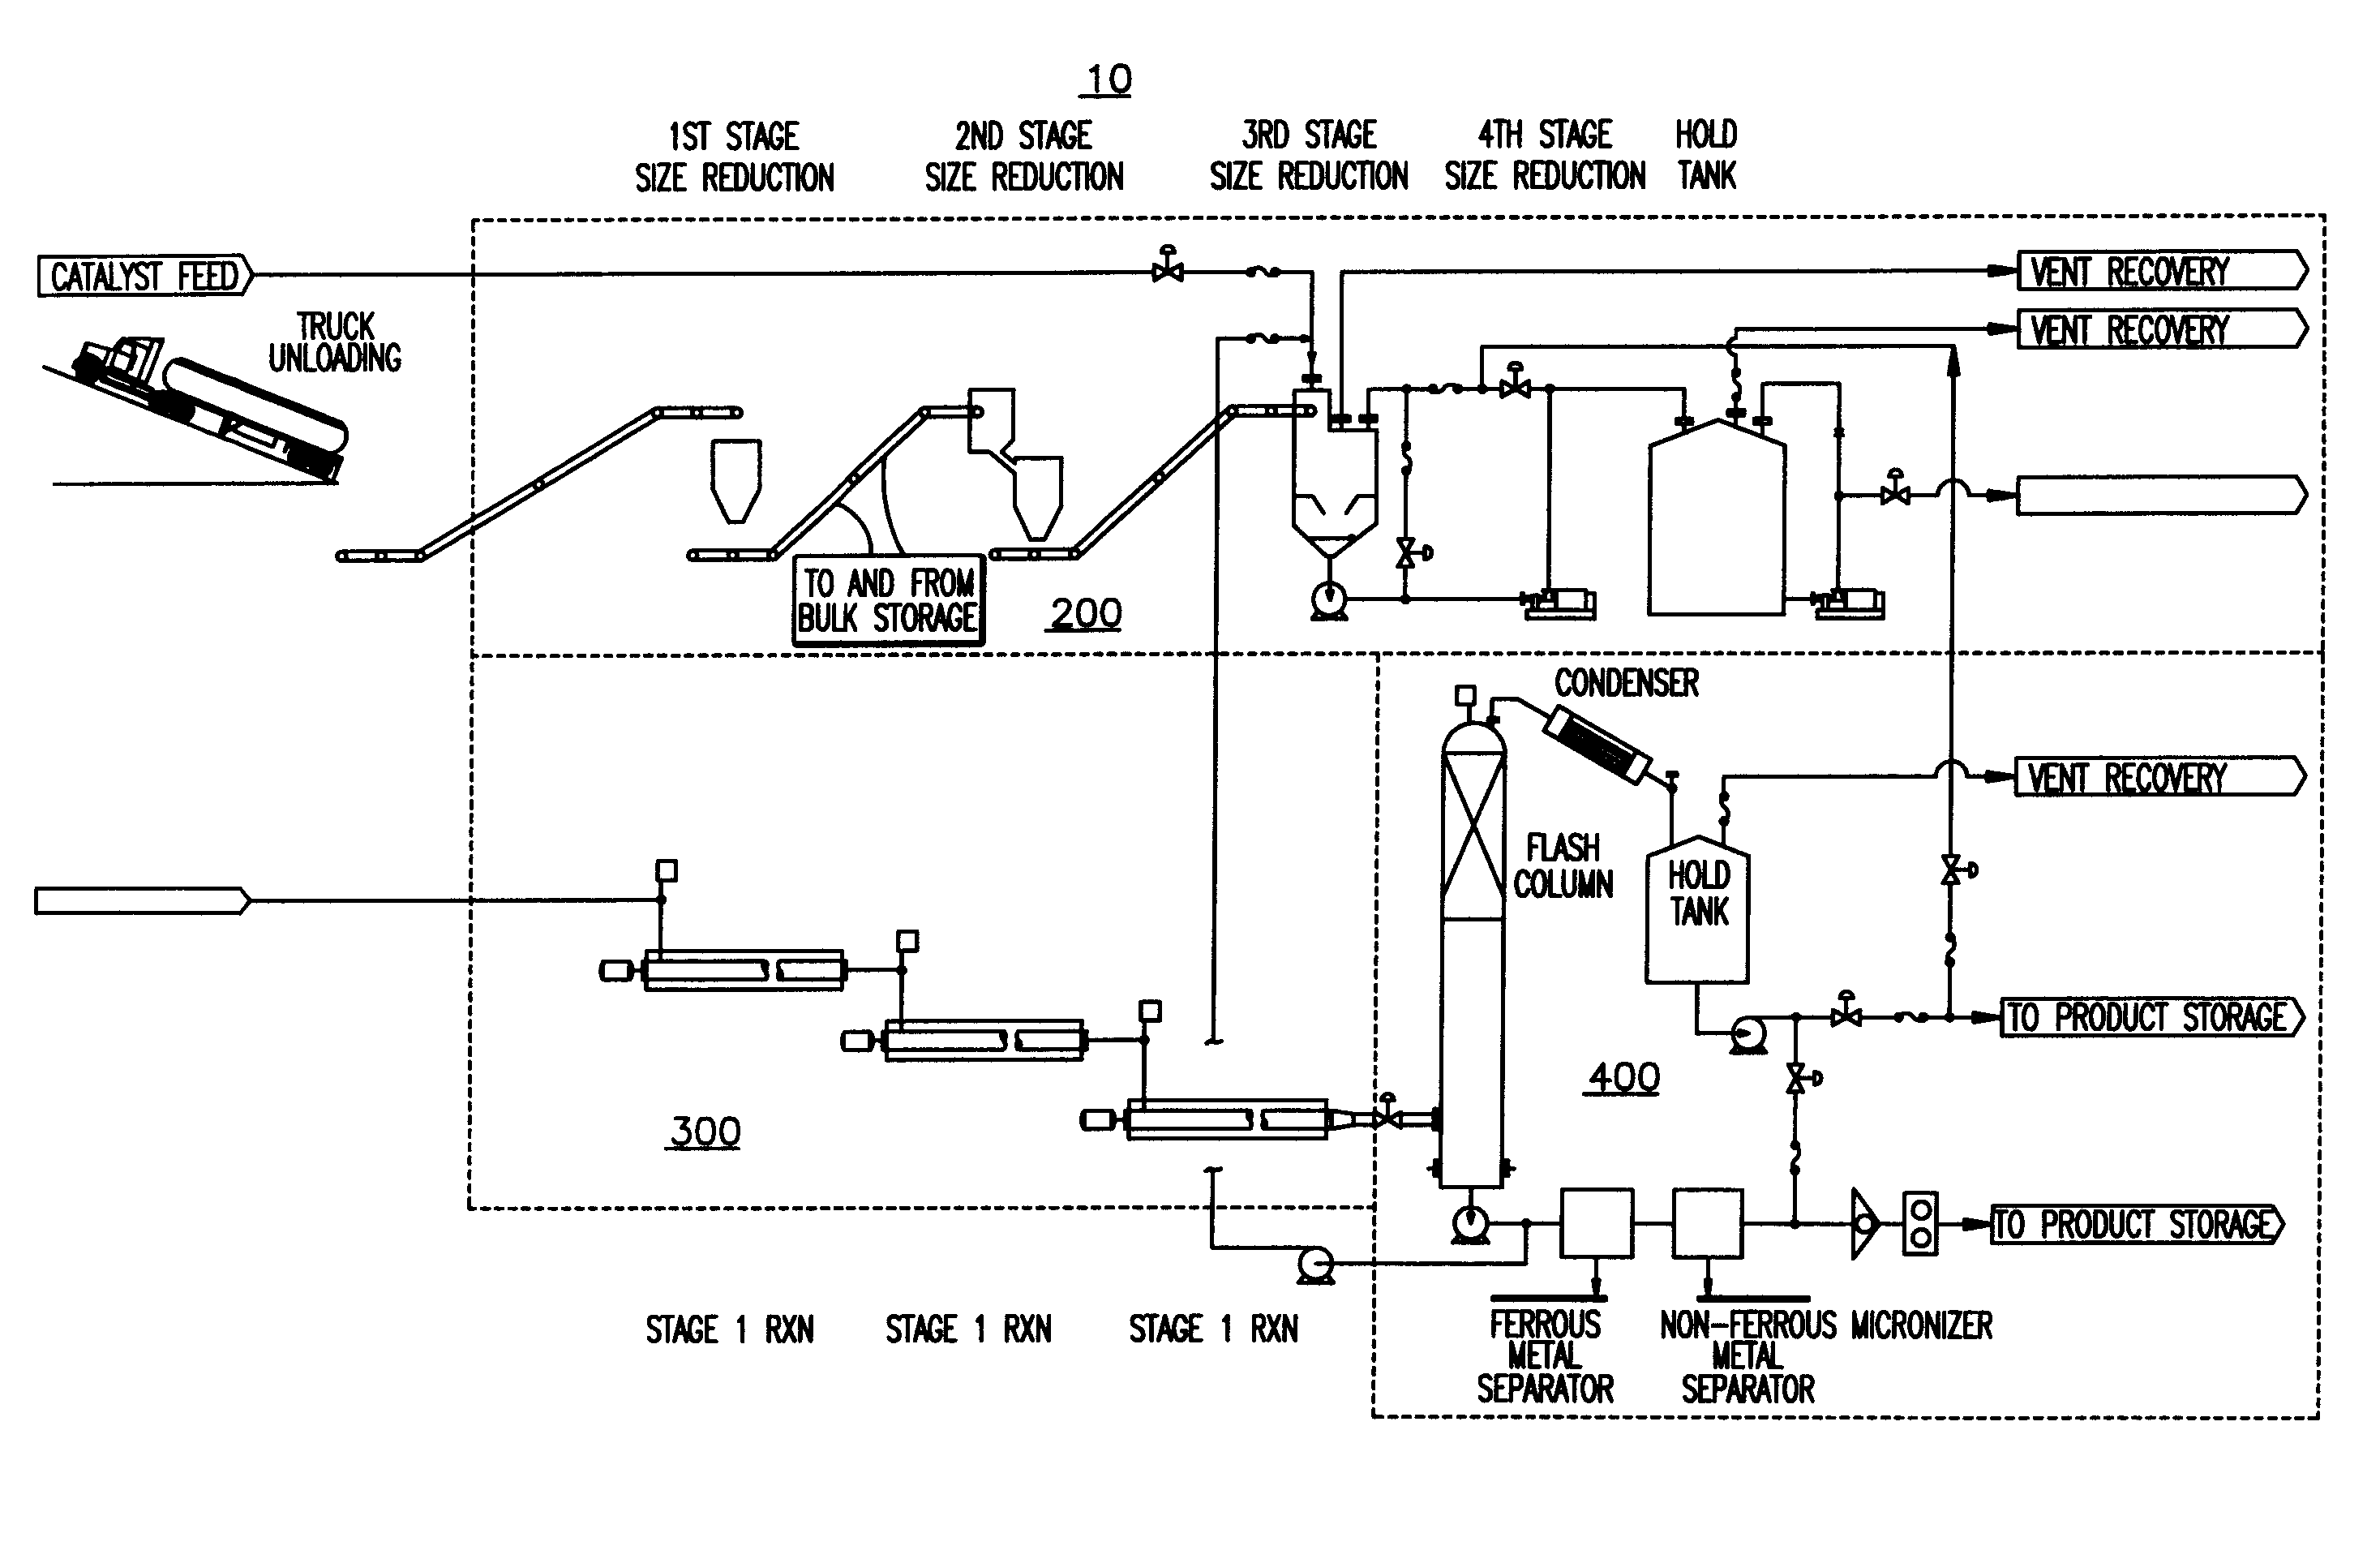 System for the production of synthetic fuels